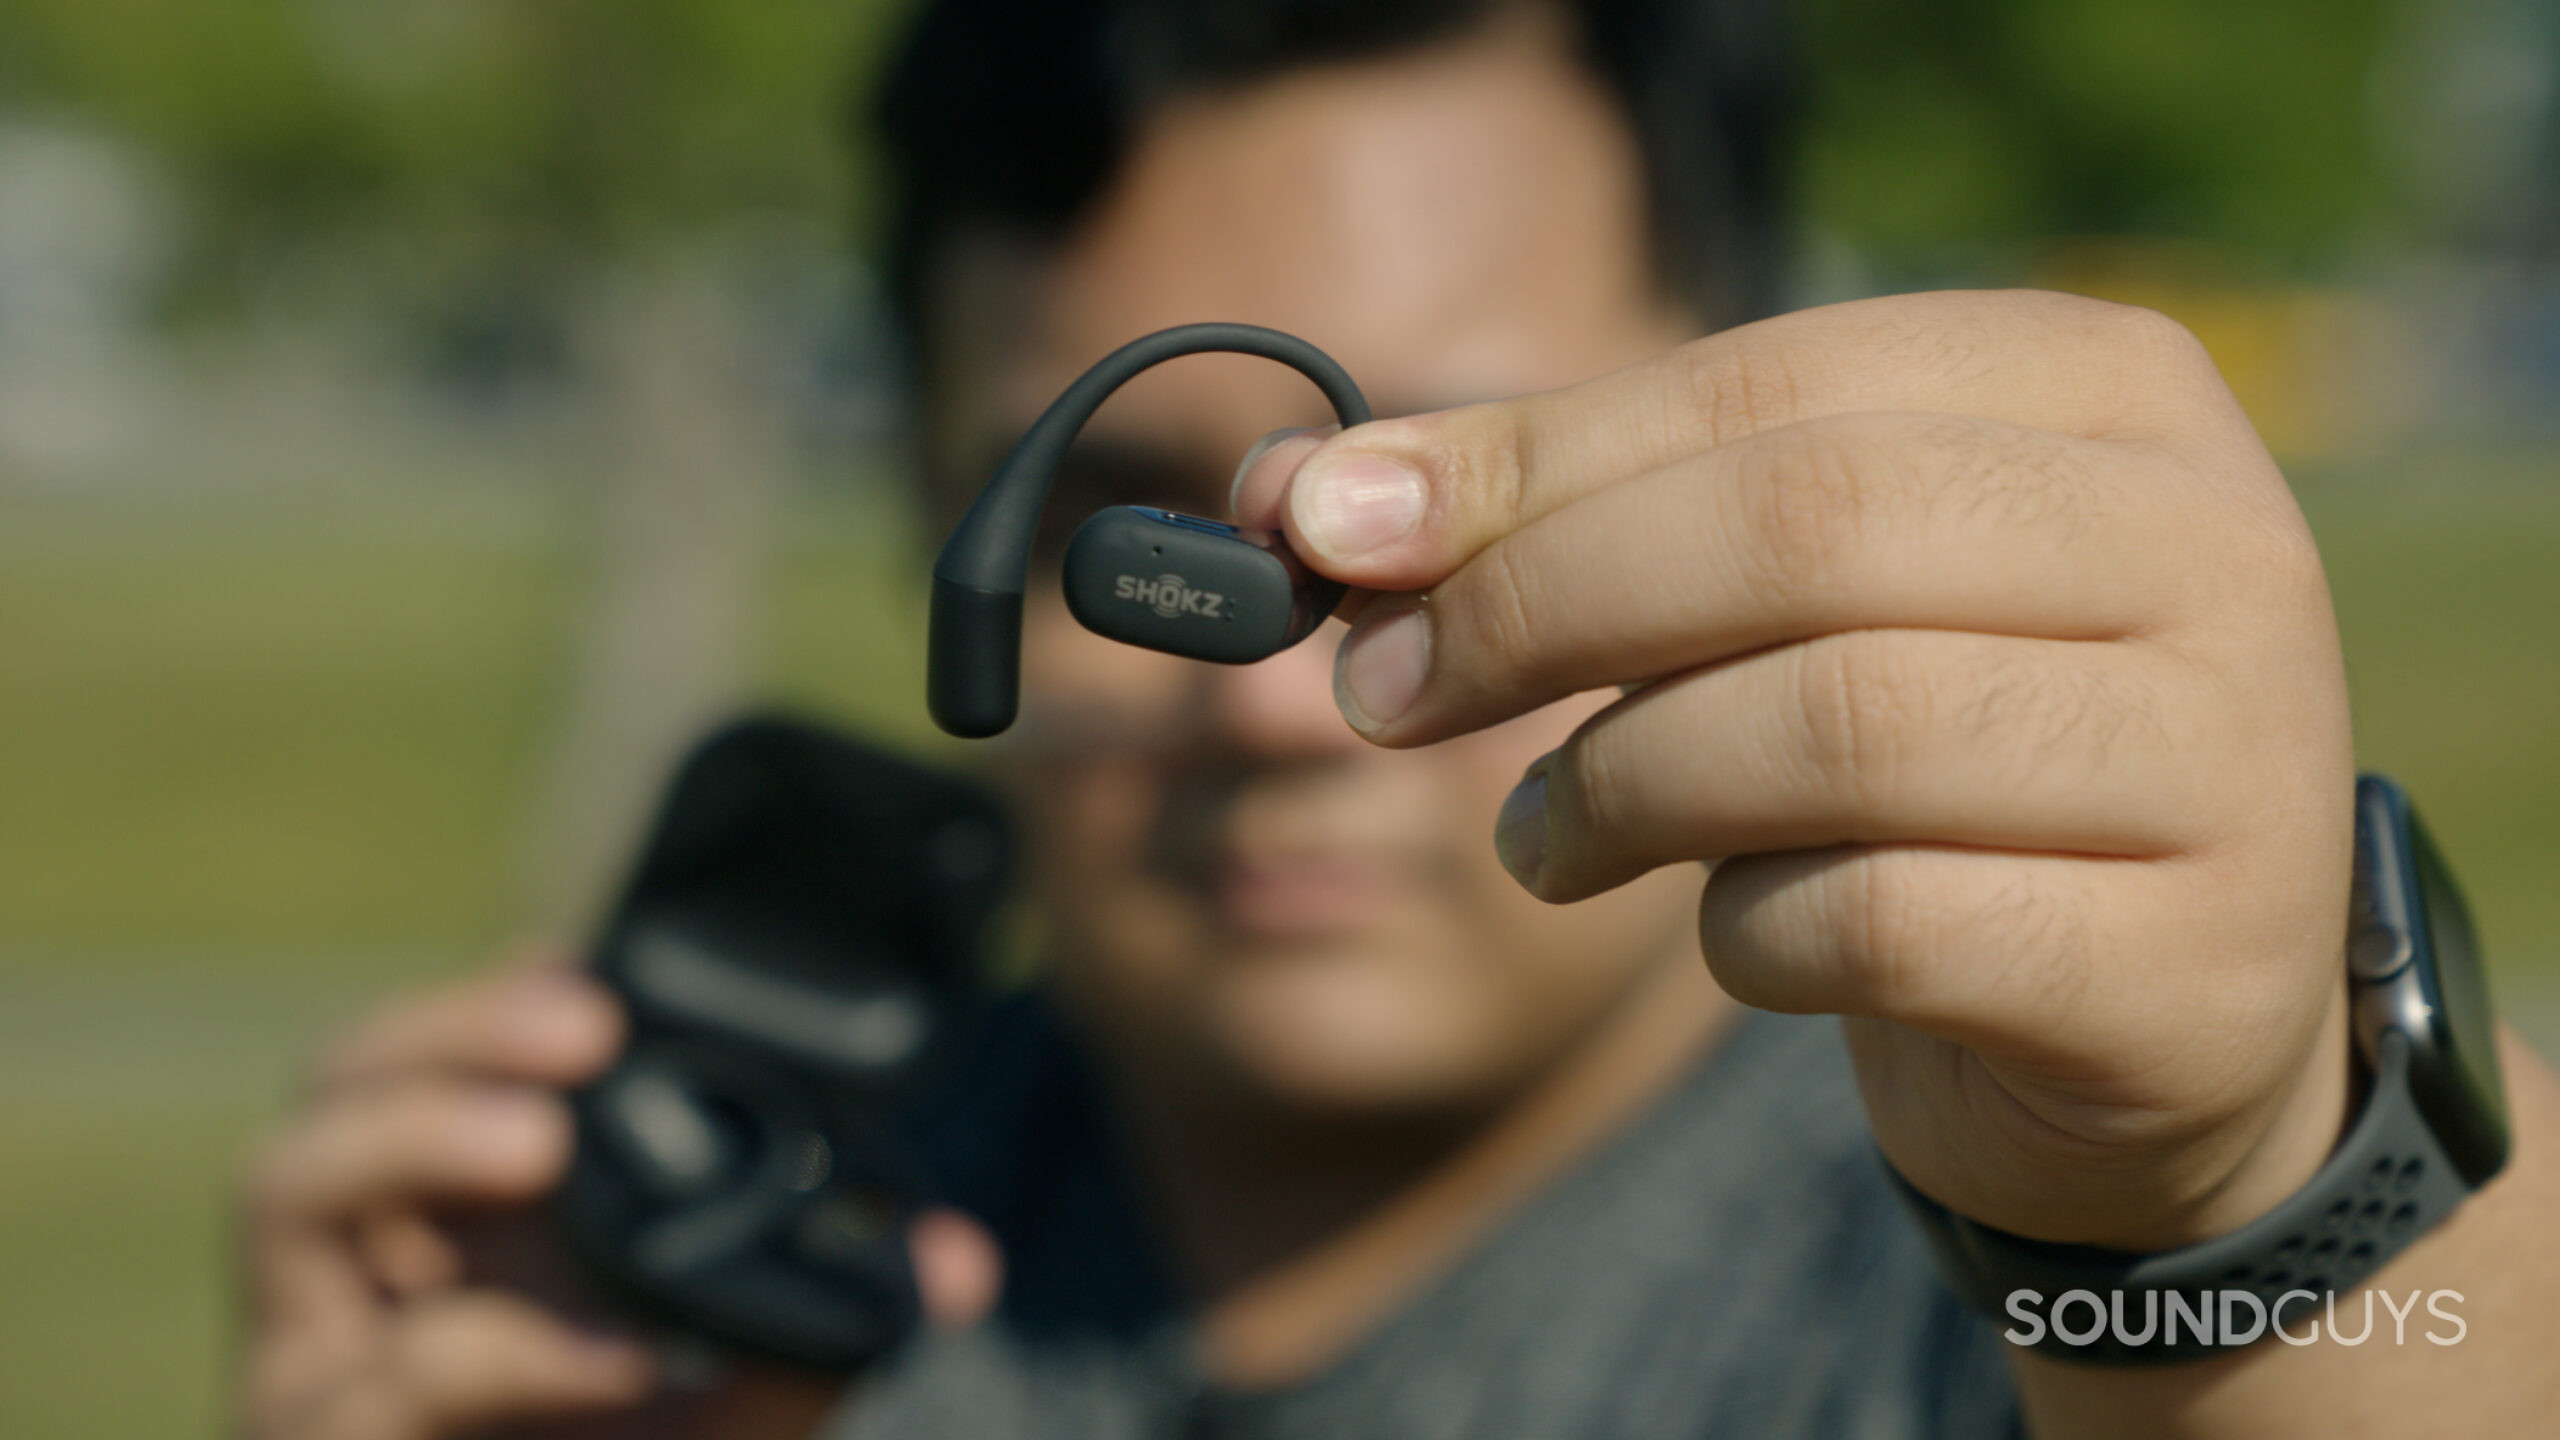 A man out of focus holds the Shokz OpenFit in focus.